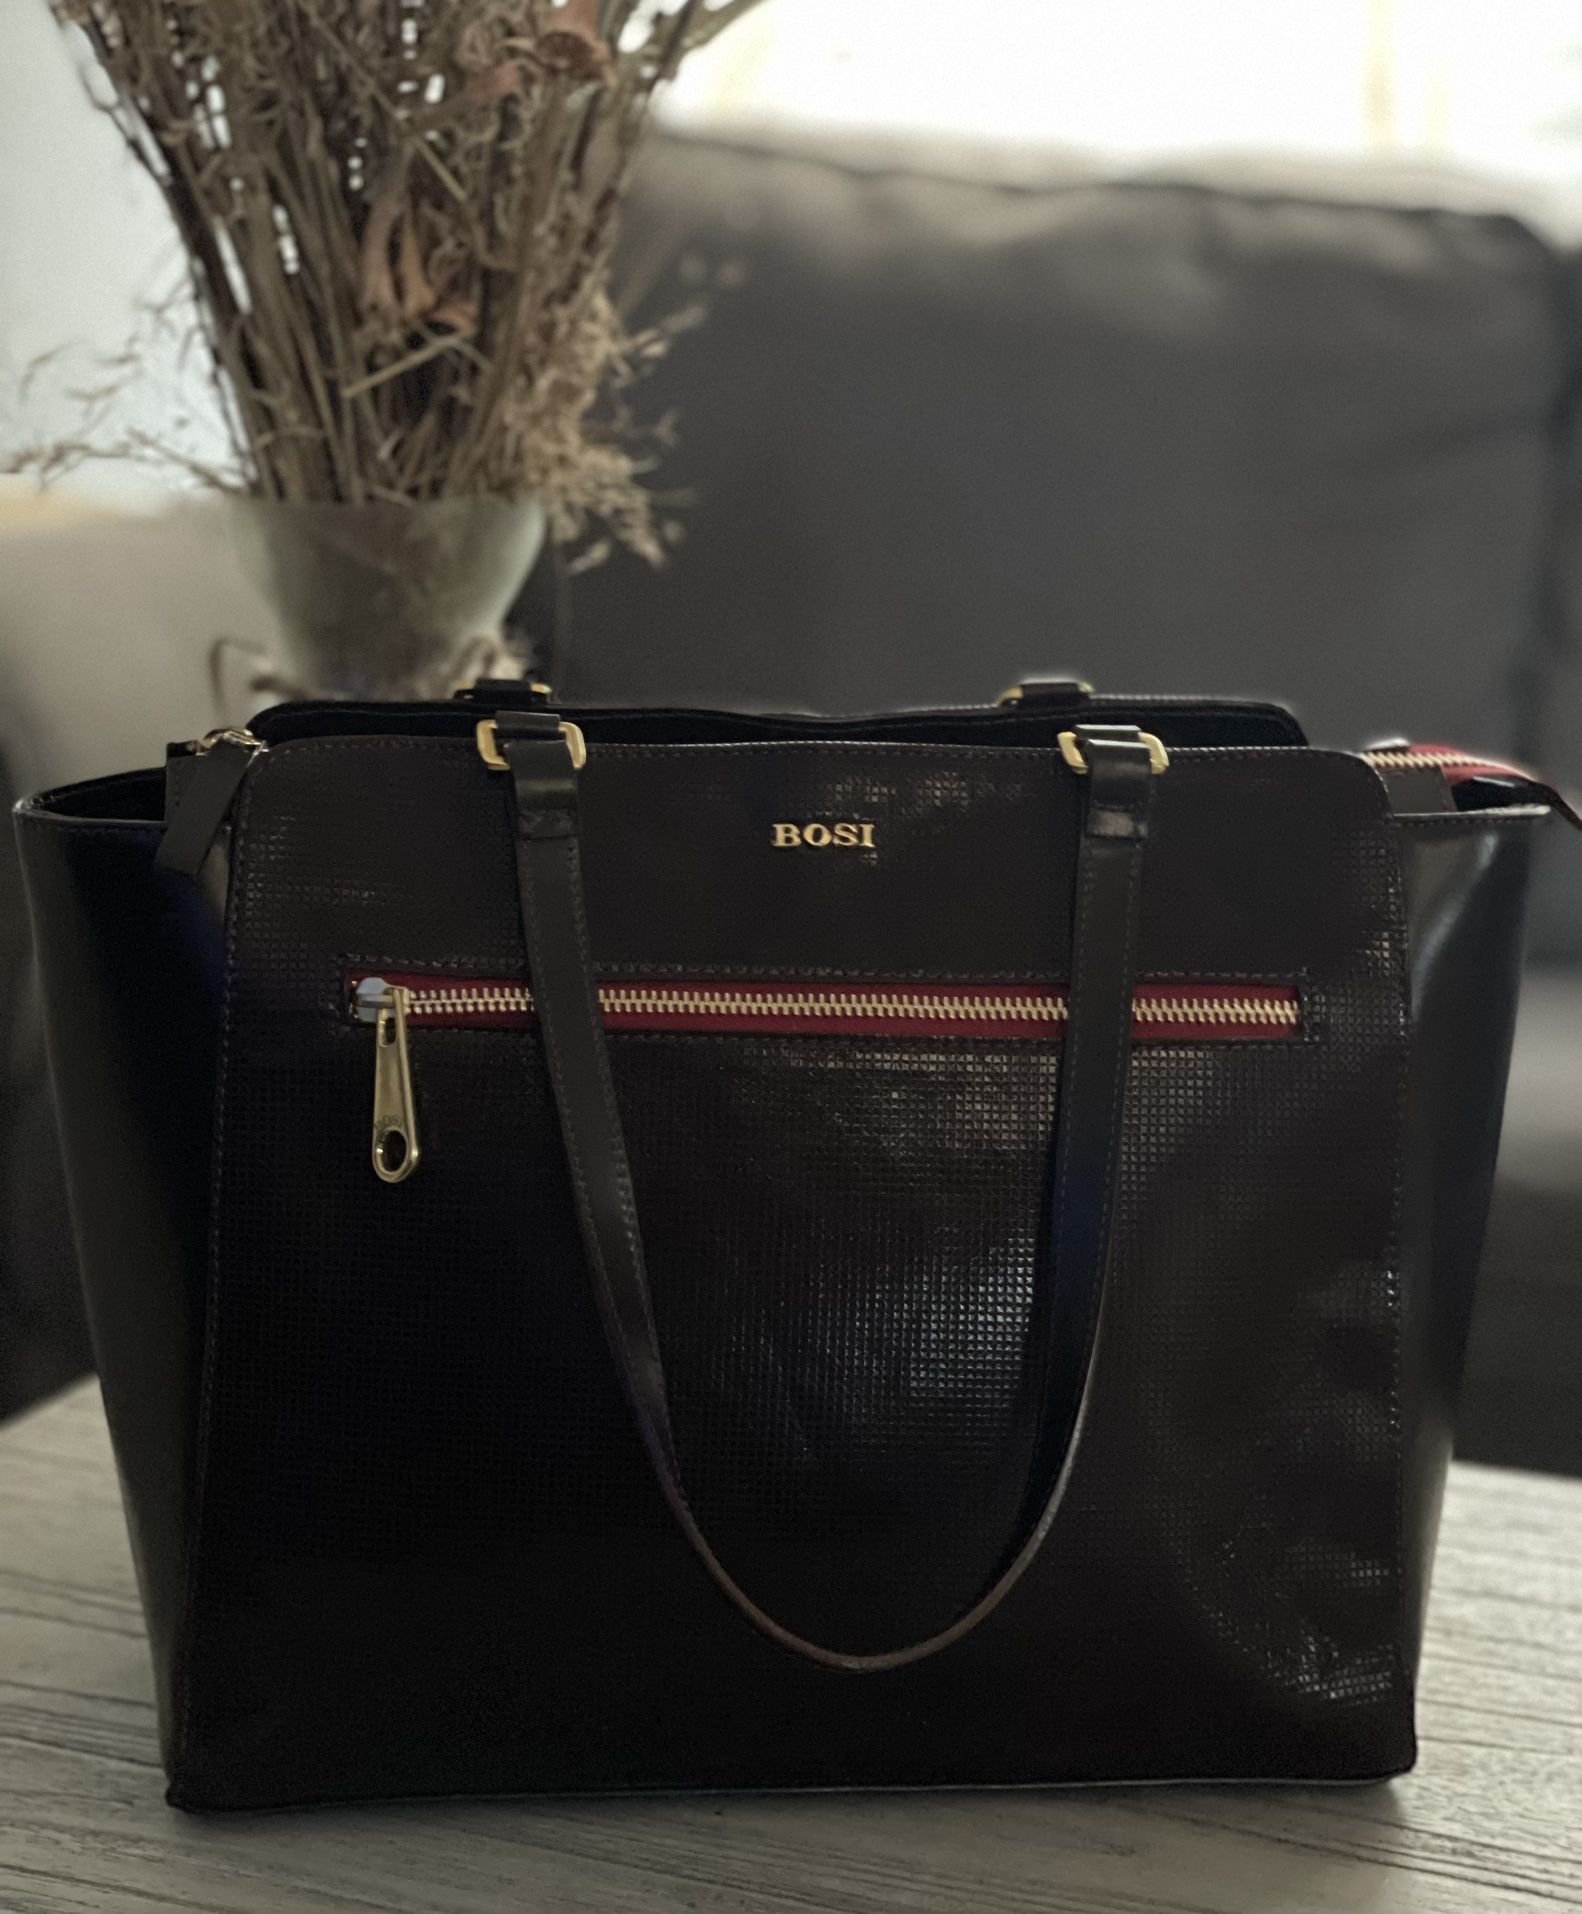 This Vintage BOSI Tote is a Stunning Addition to any Wardrobe. The Deep Burgundy\Merlot Red Leather Exterior is Accented with Studs and Gold Hardware,